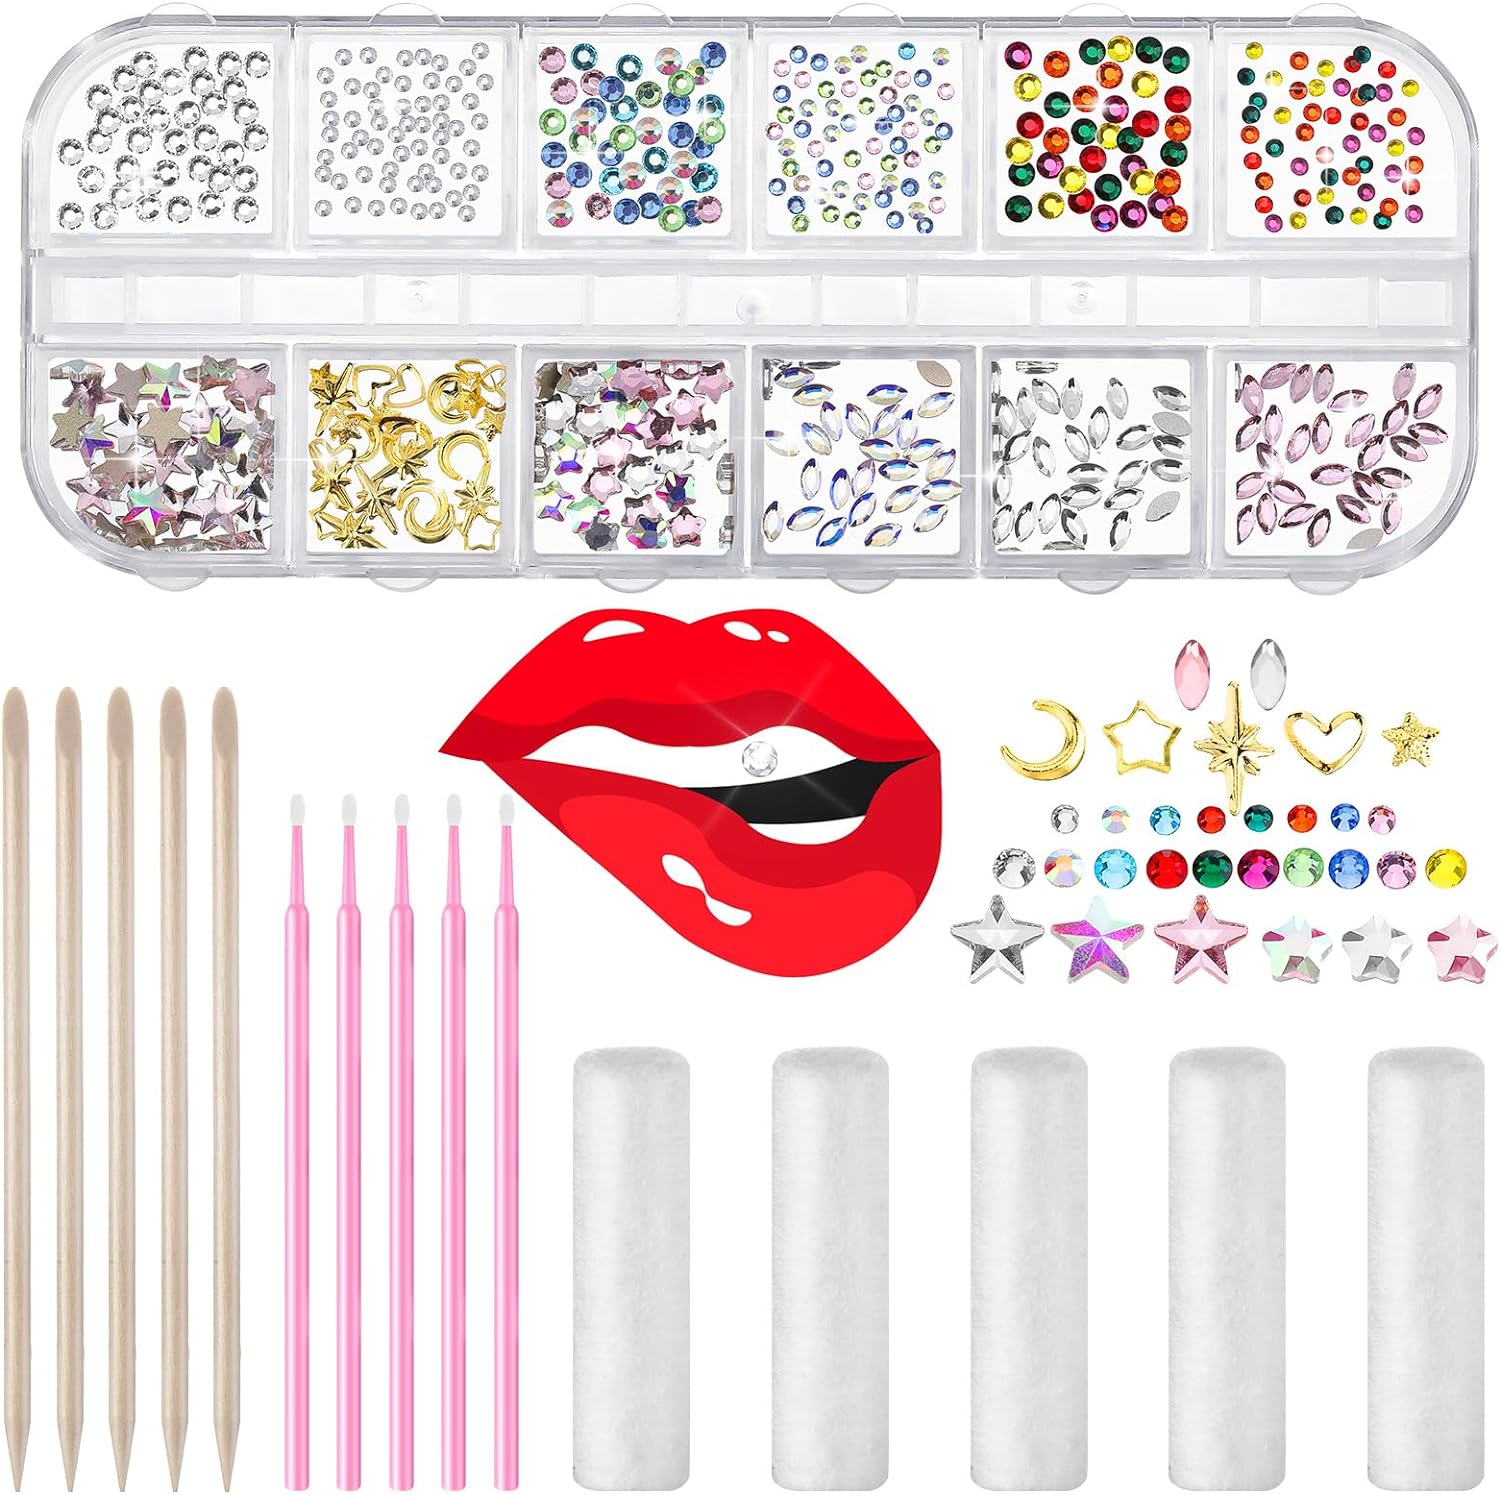 Tooth Gem Kit Teeth Gems Teeth Gems Kit Teeth Jewelry Kit With